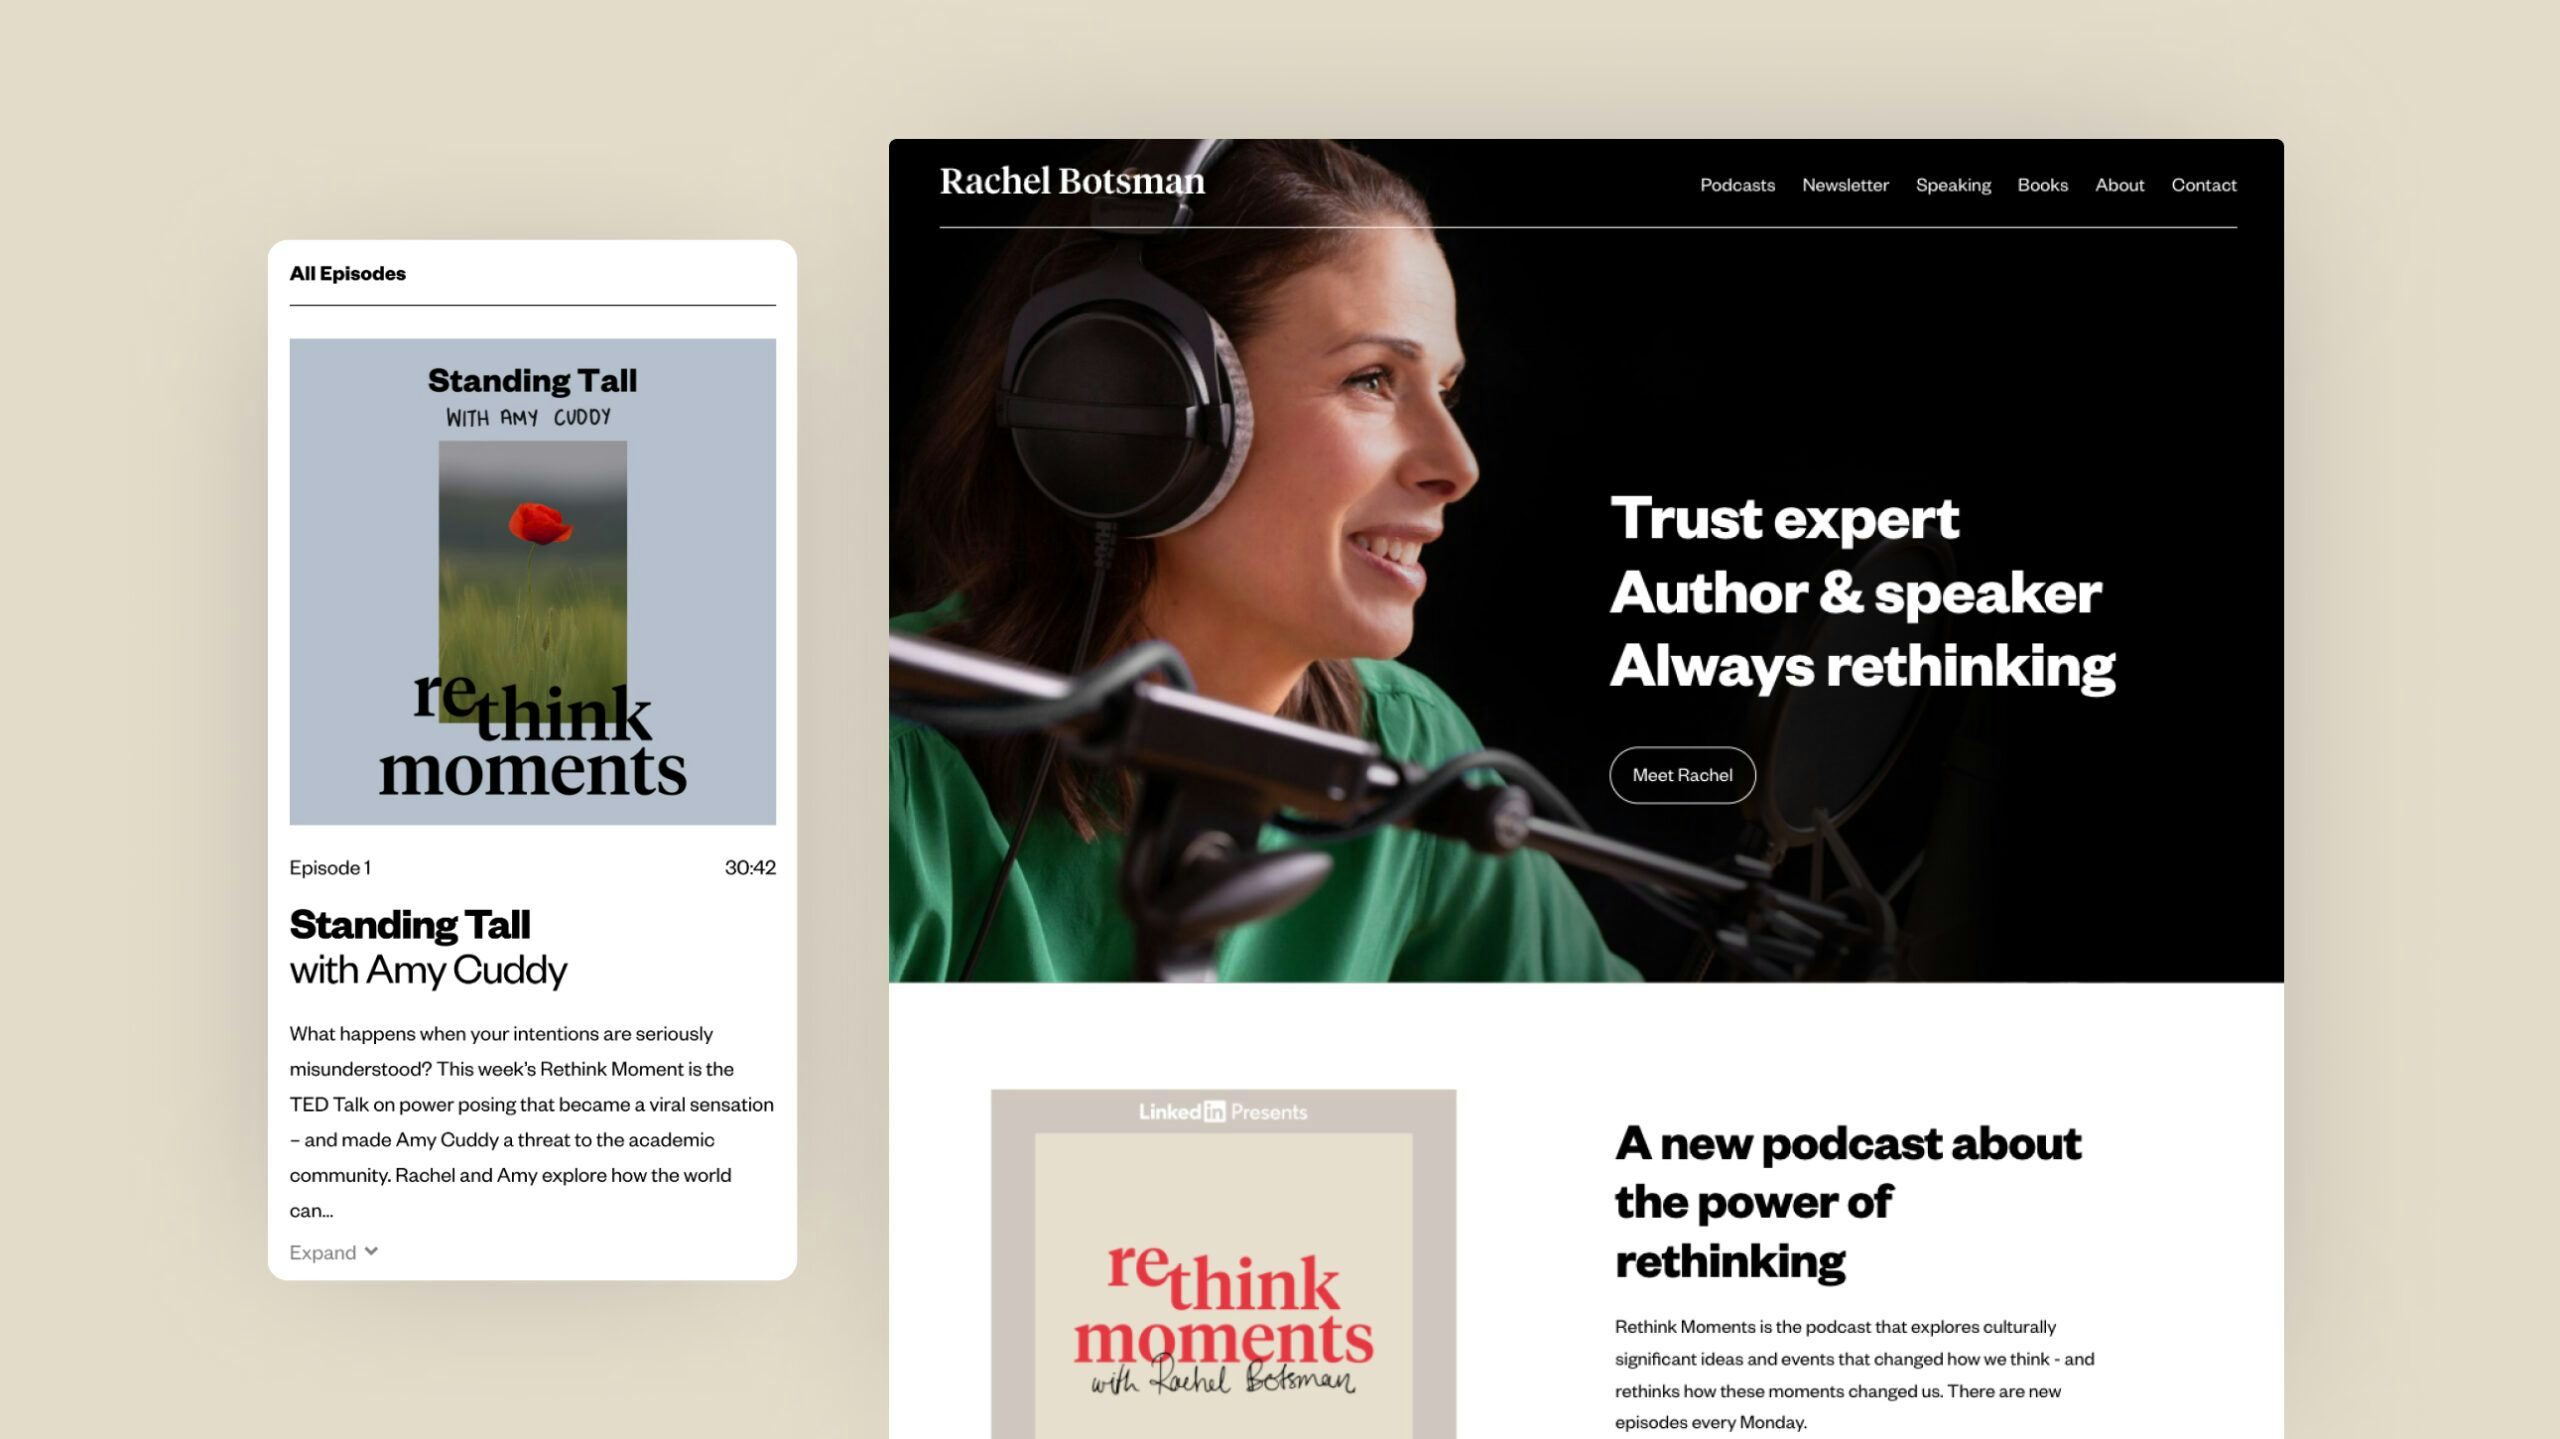 Rachel Botsman launches new website and announces podcast series on new LinkedIn Podcast Network